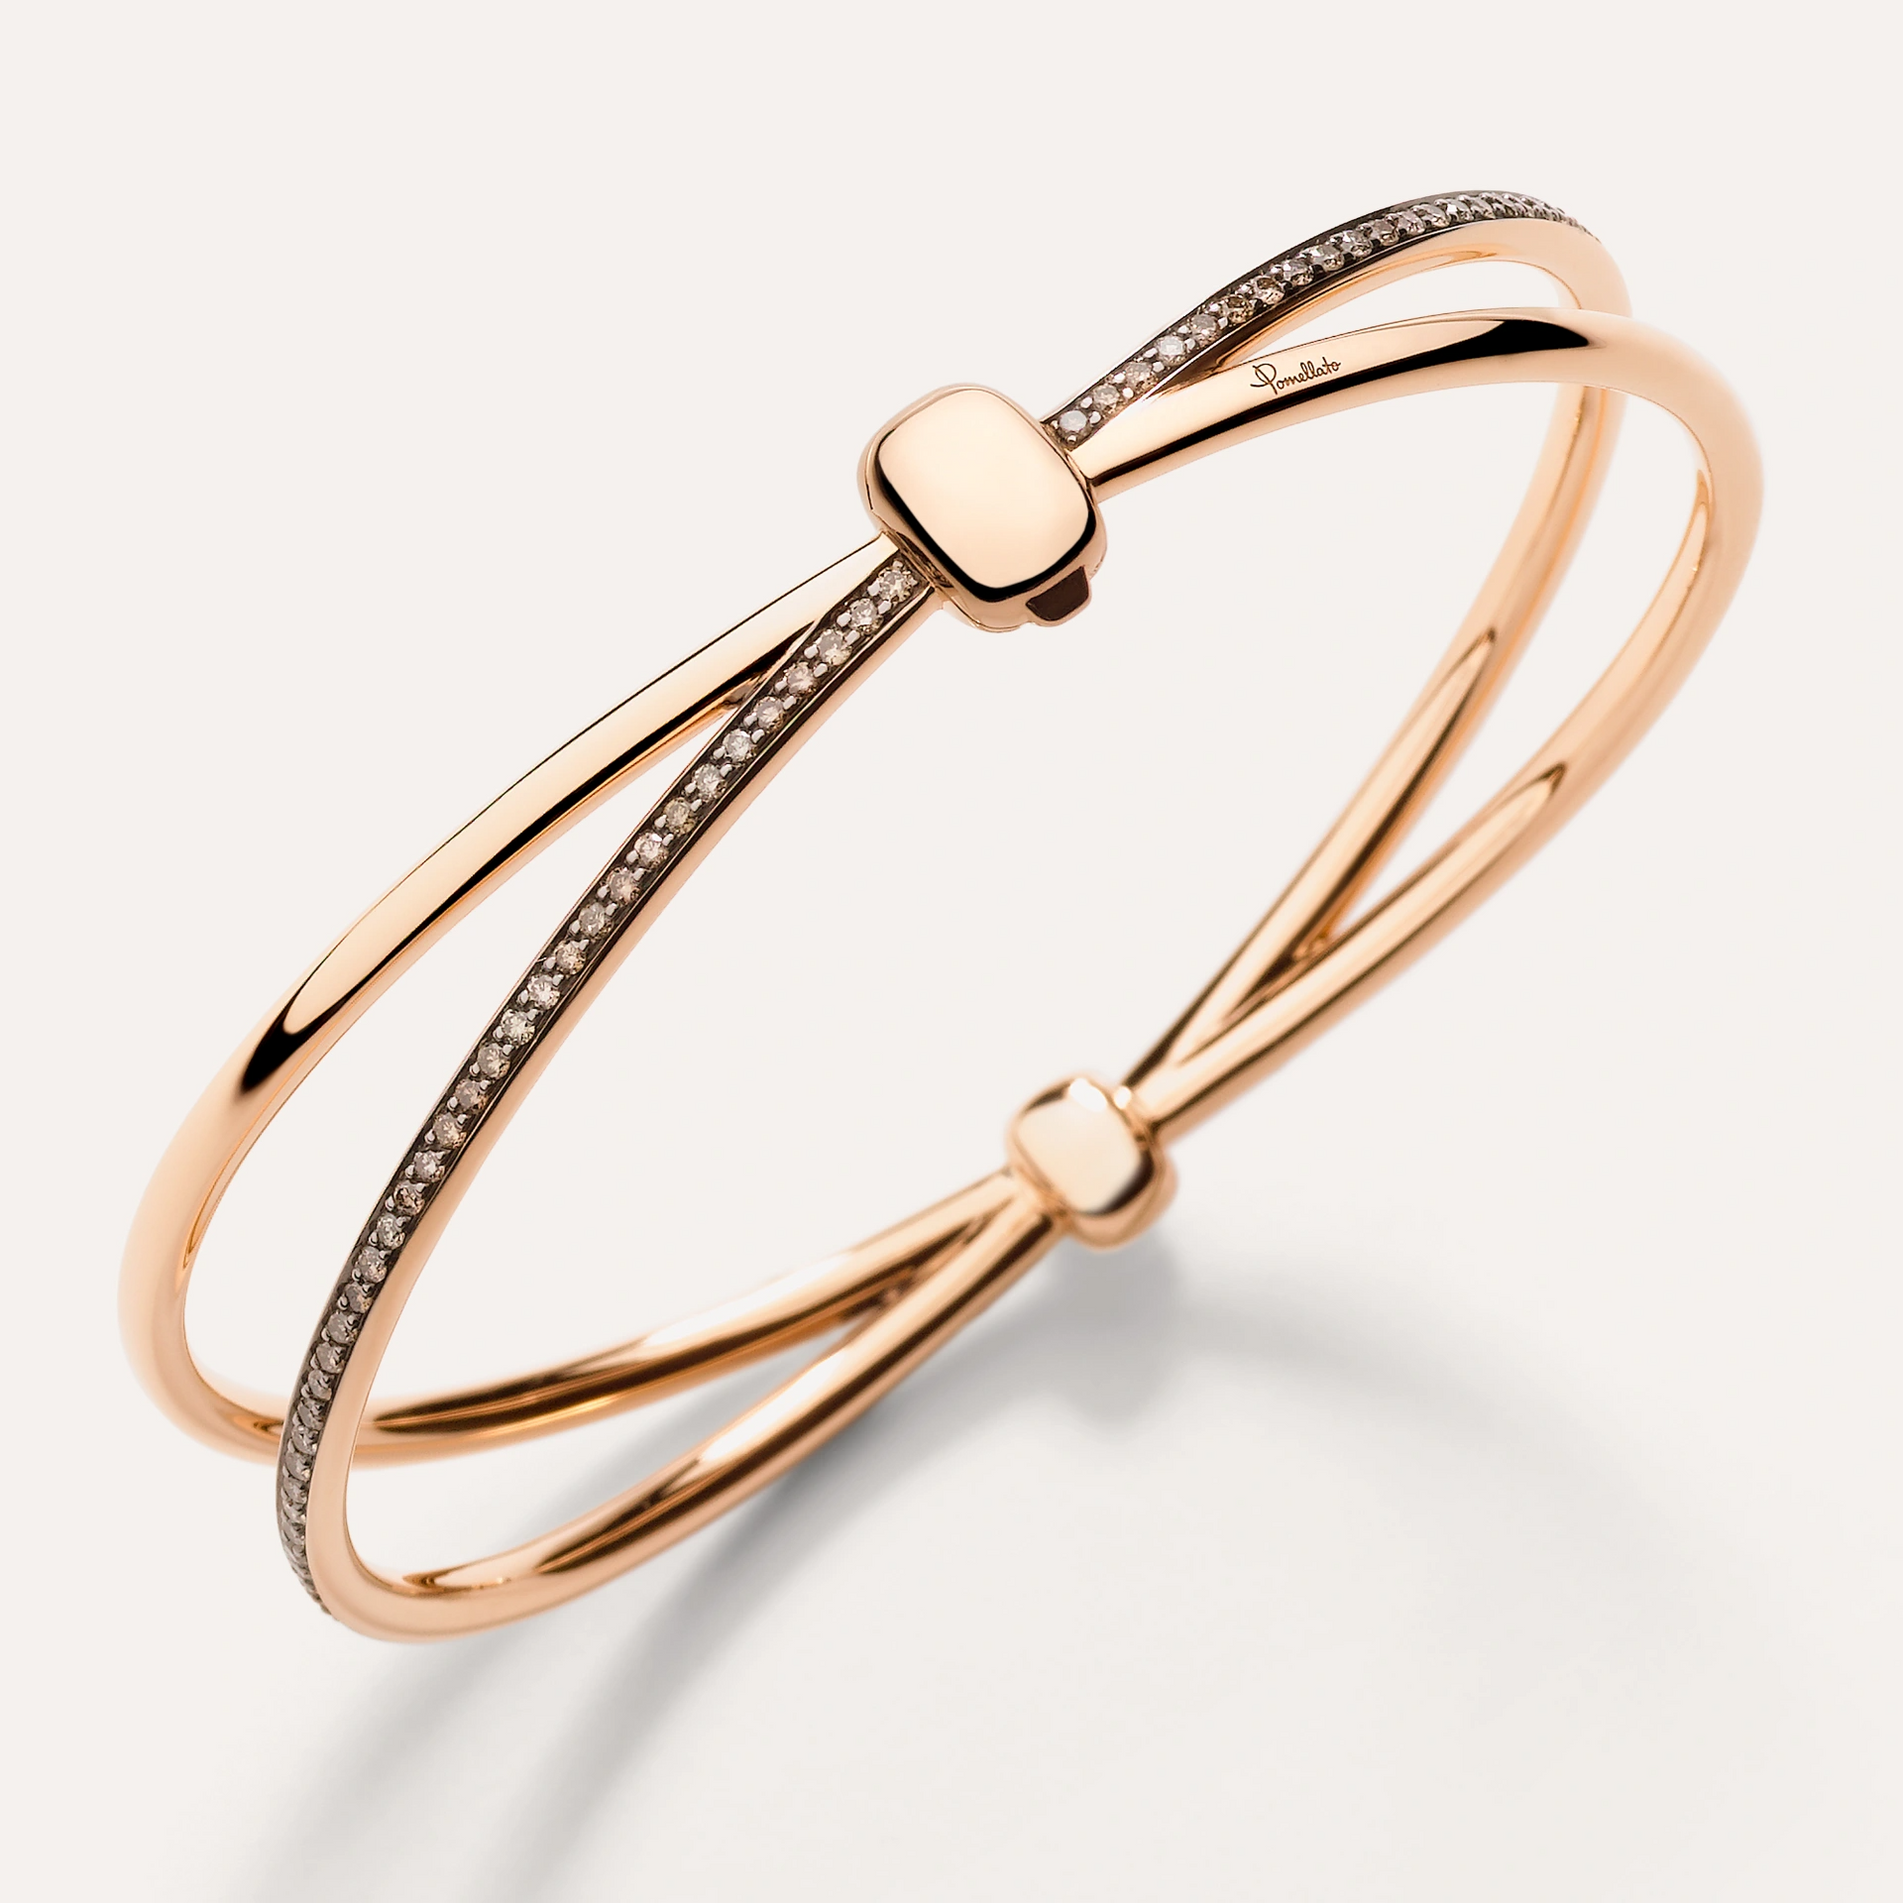 Pomellato Together Bangle in 18k Rose Gold with Brown Diamonds - Orsini Jewellers